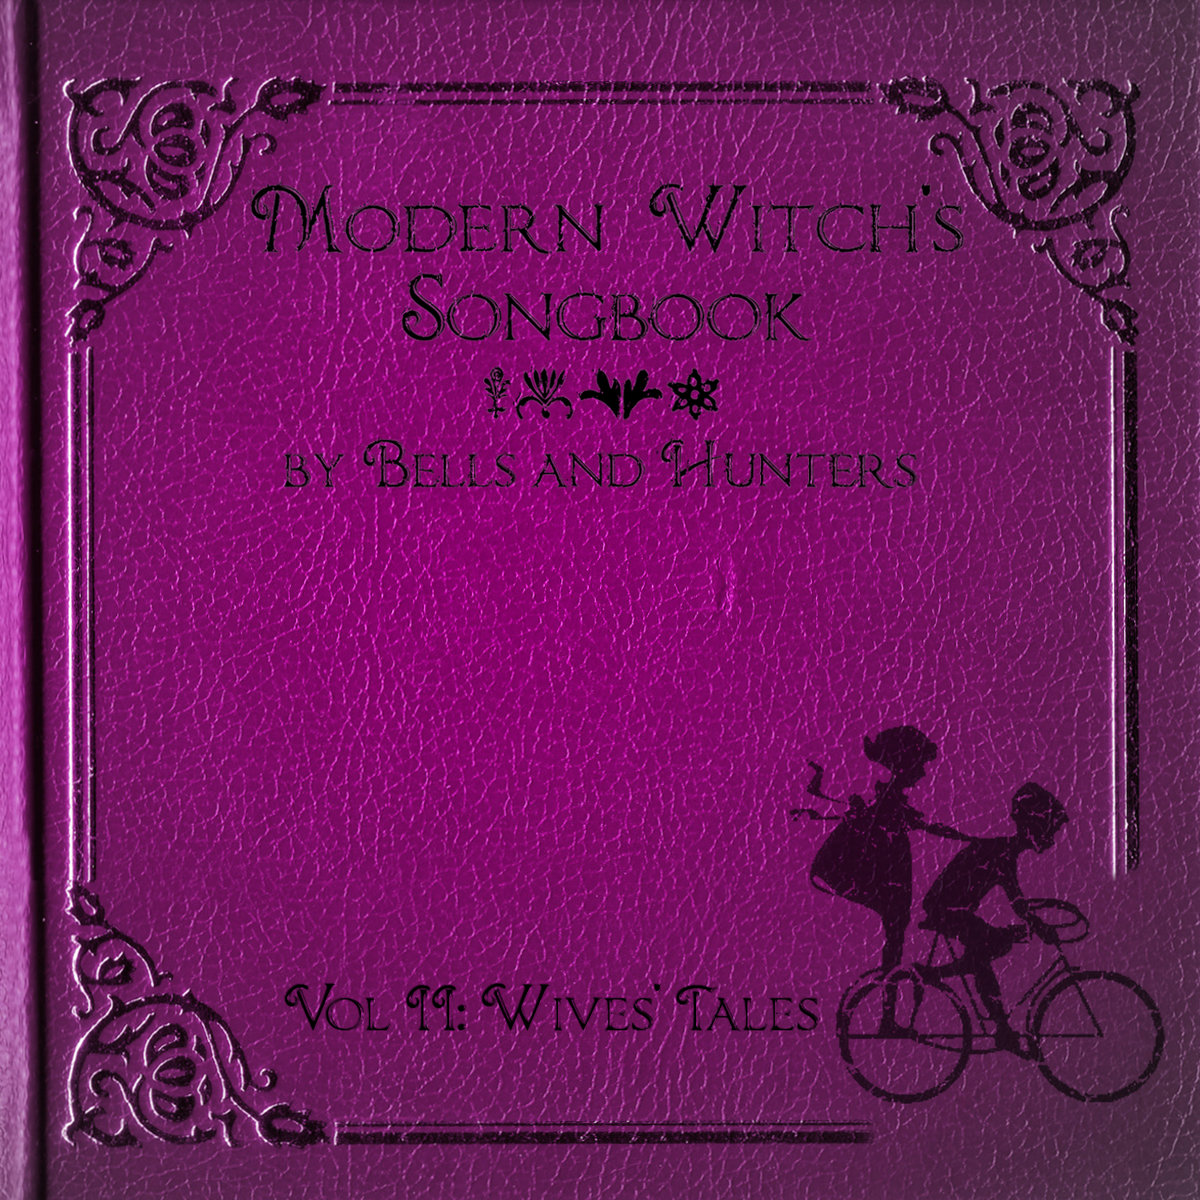 MODERN WITCH'S SONGBOOK VOL 2